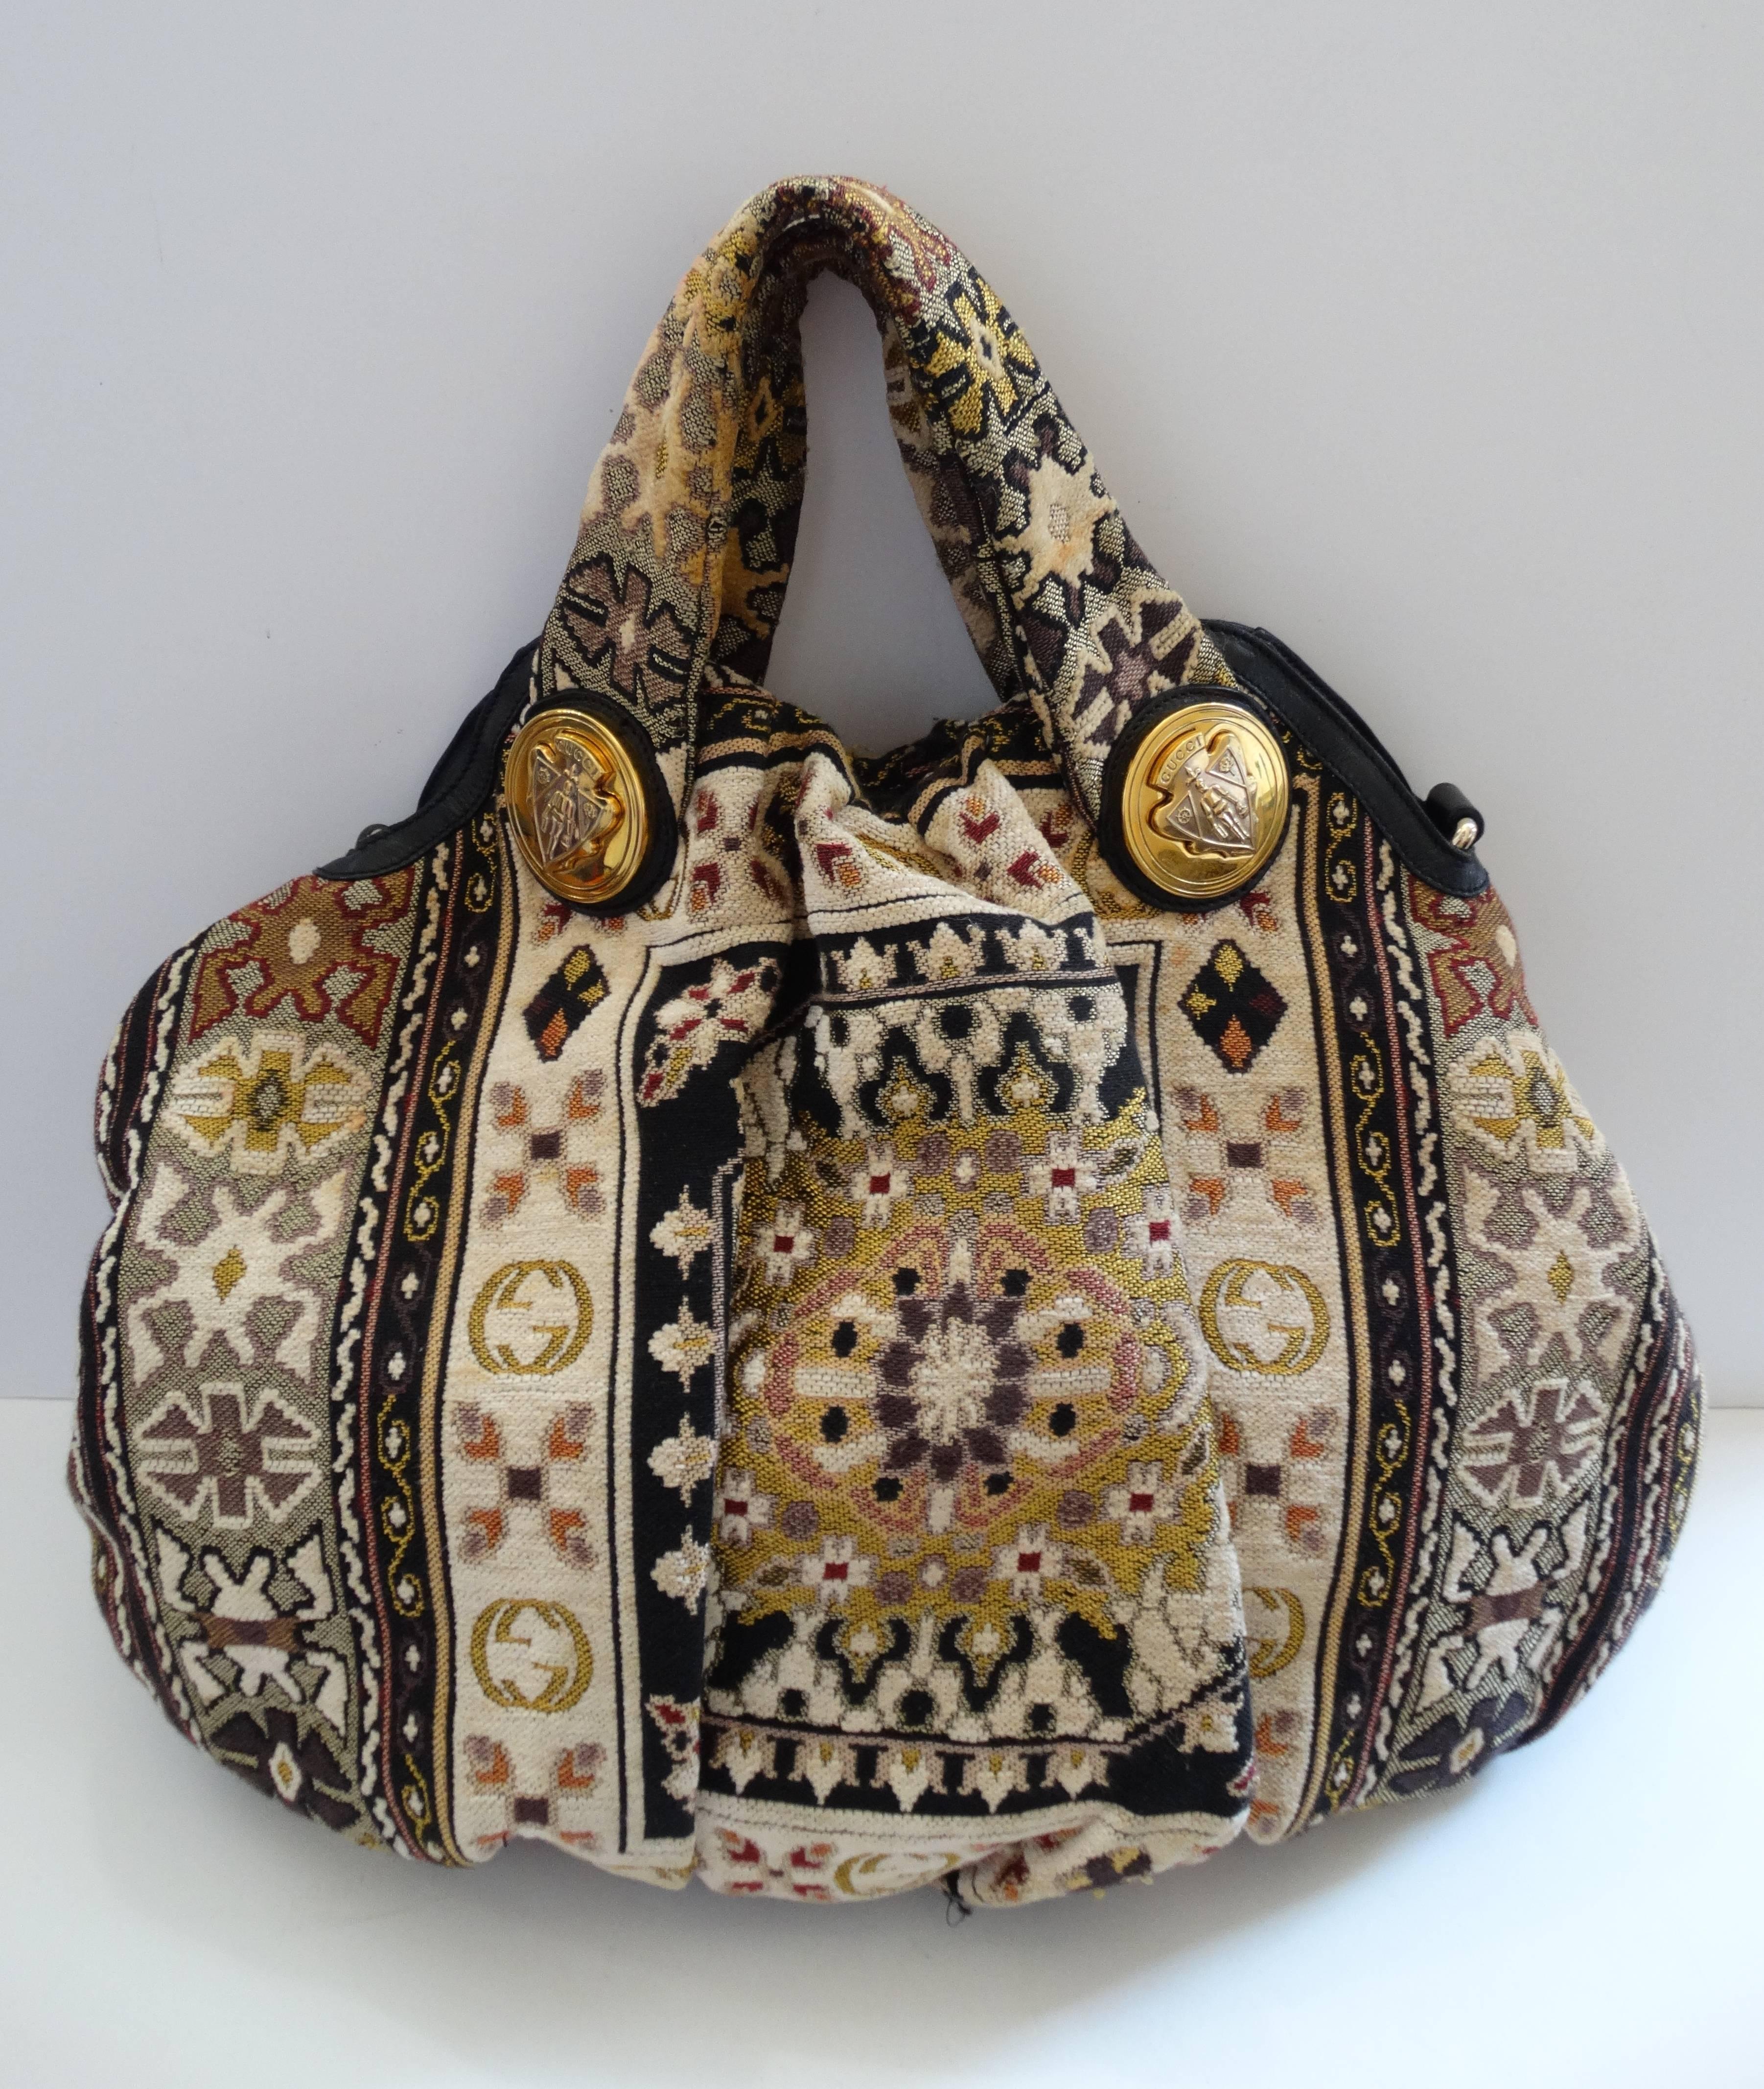 Get your Gucci on- with our adorable tapestry tote bag! Woven cotton tapestry Persian rug inspired print with Gucci G motifs throughout. Two Gucci medallions cast in gold metal on either side of the top handles. Two metal loops on either side, you